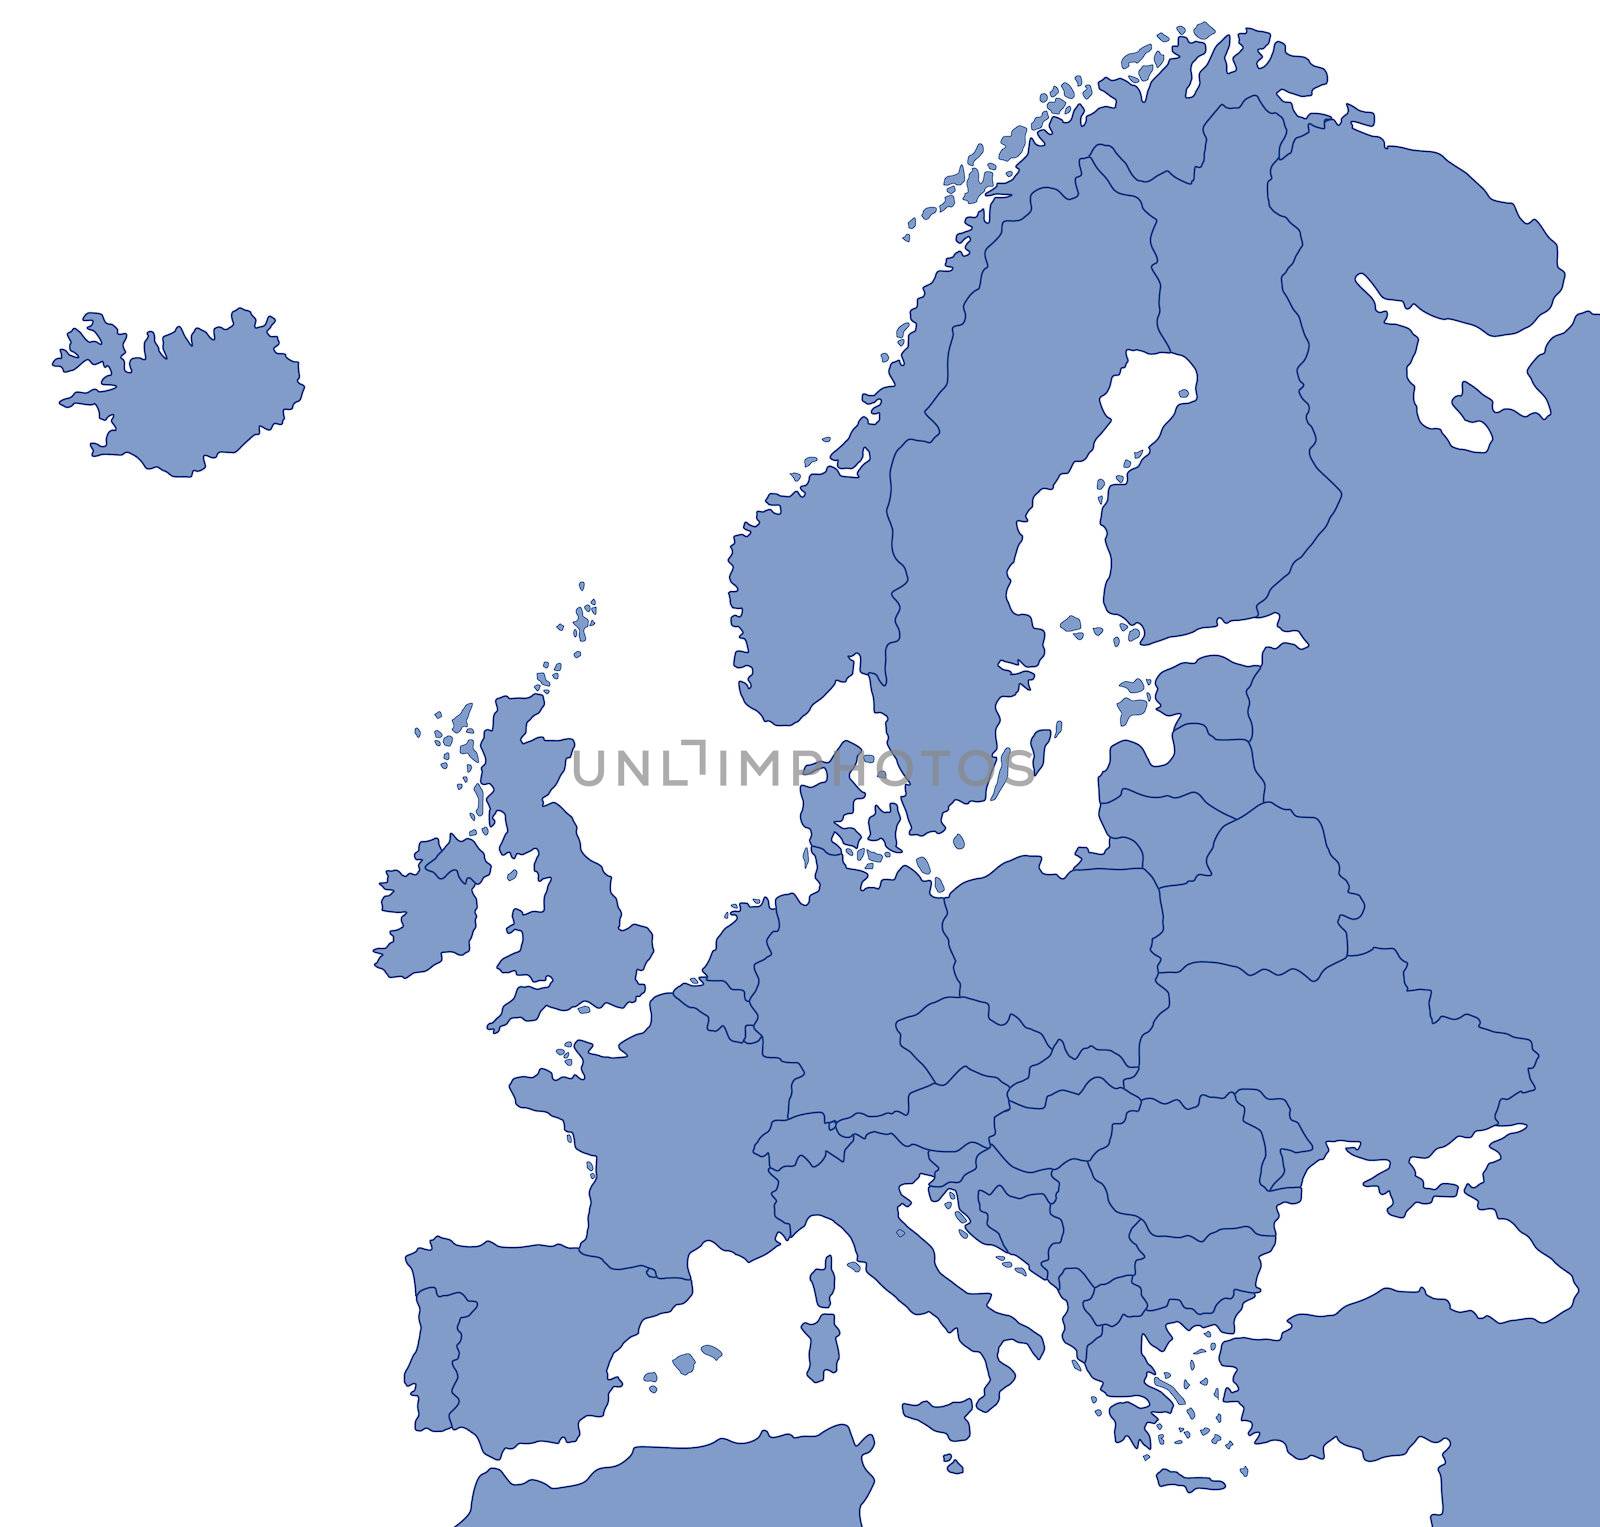 An outlined map of Europe in blue tone showing the different countries. All isolated on white background.